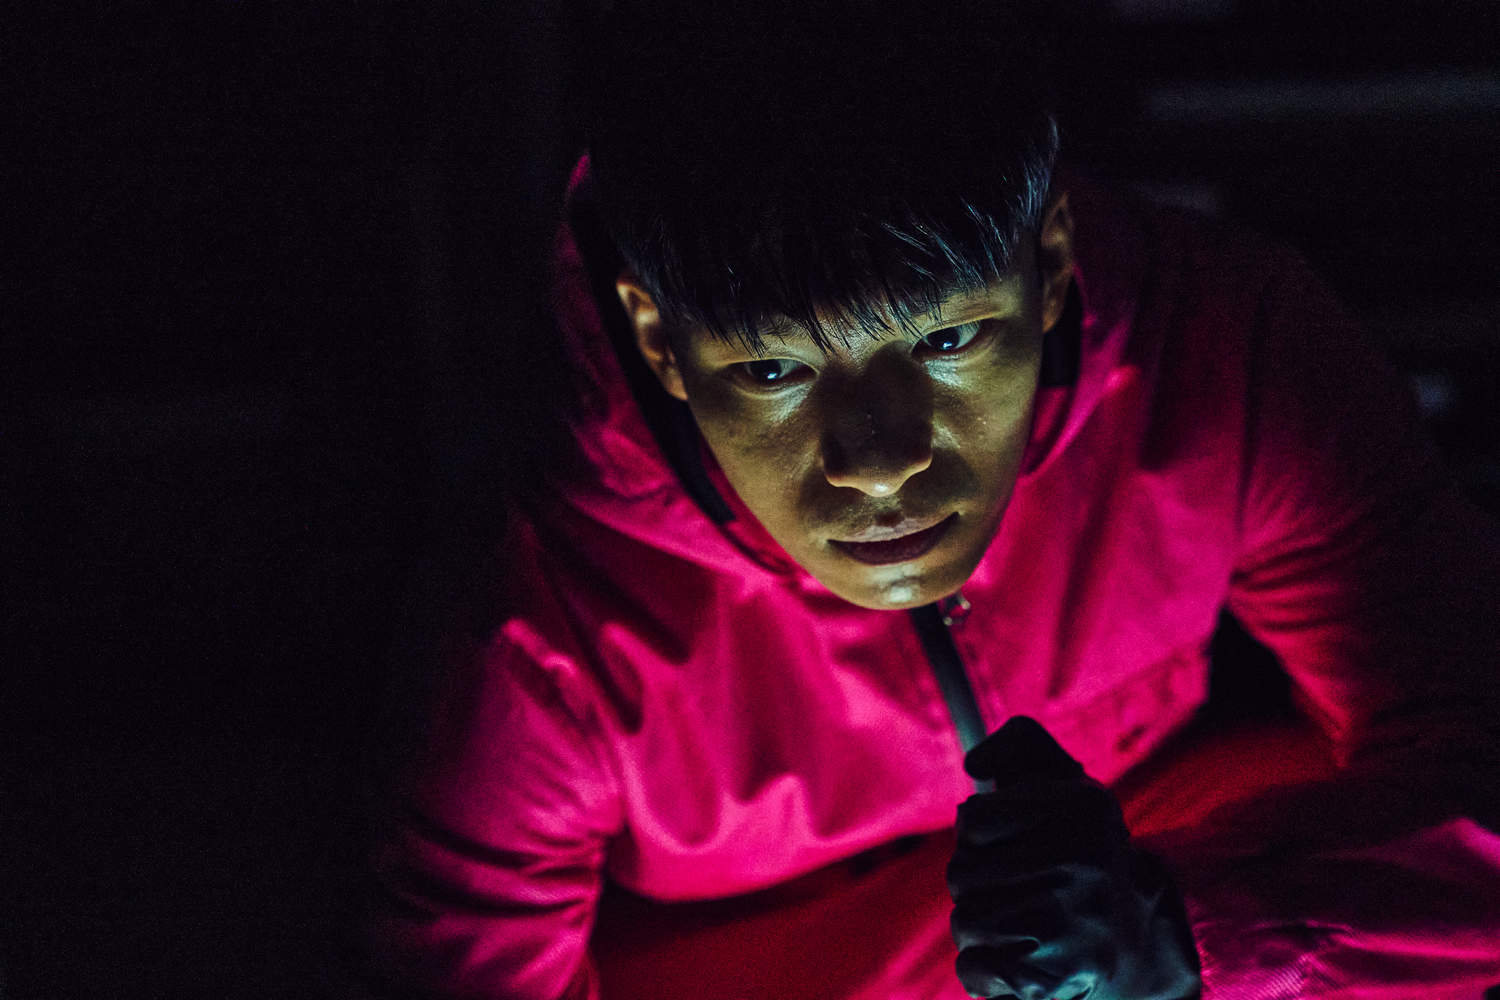 A man in a pink suit crawls with a flashlight in this image from Siren Pictures Inc.